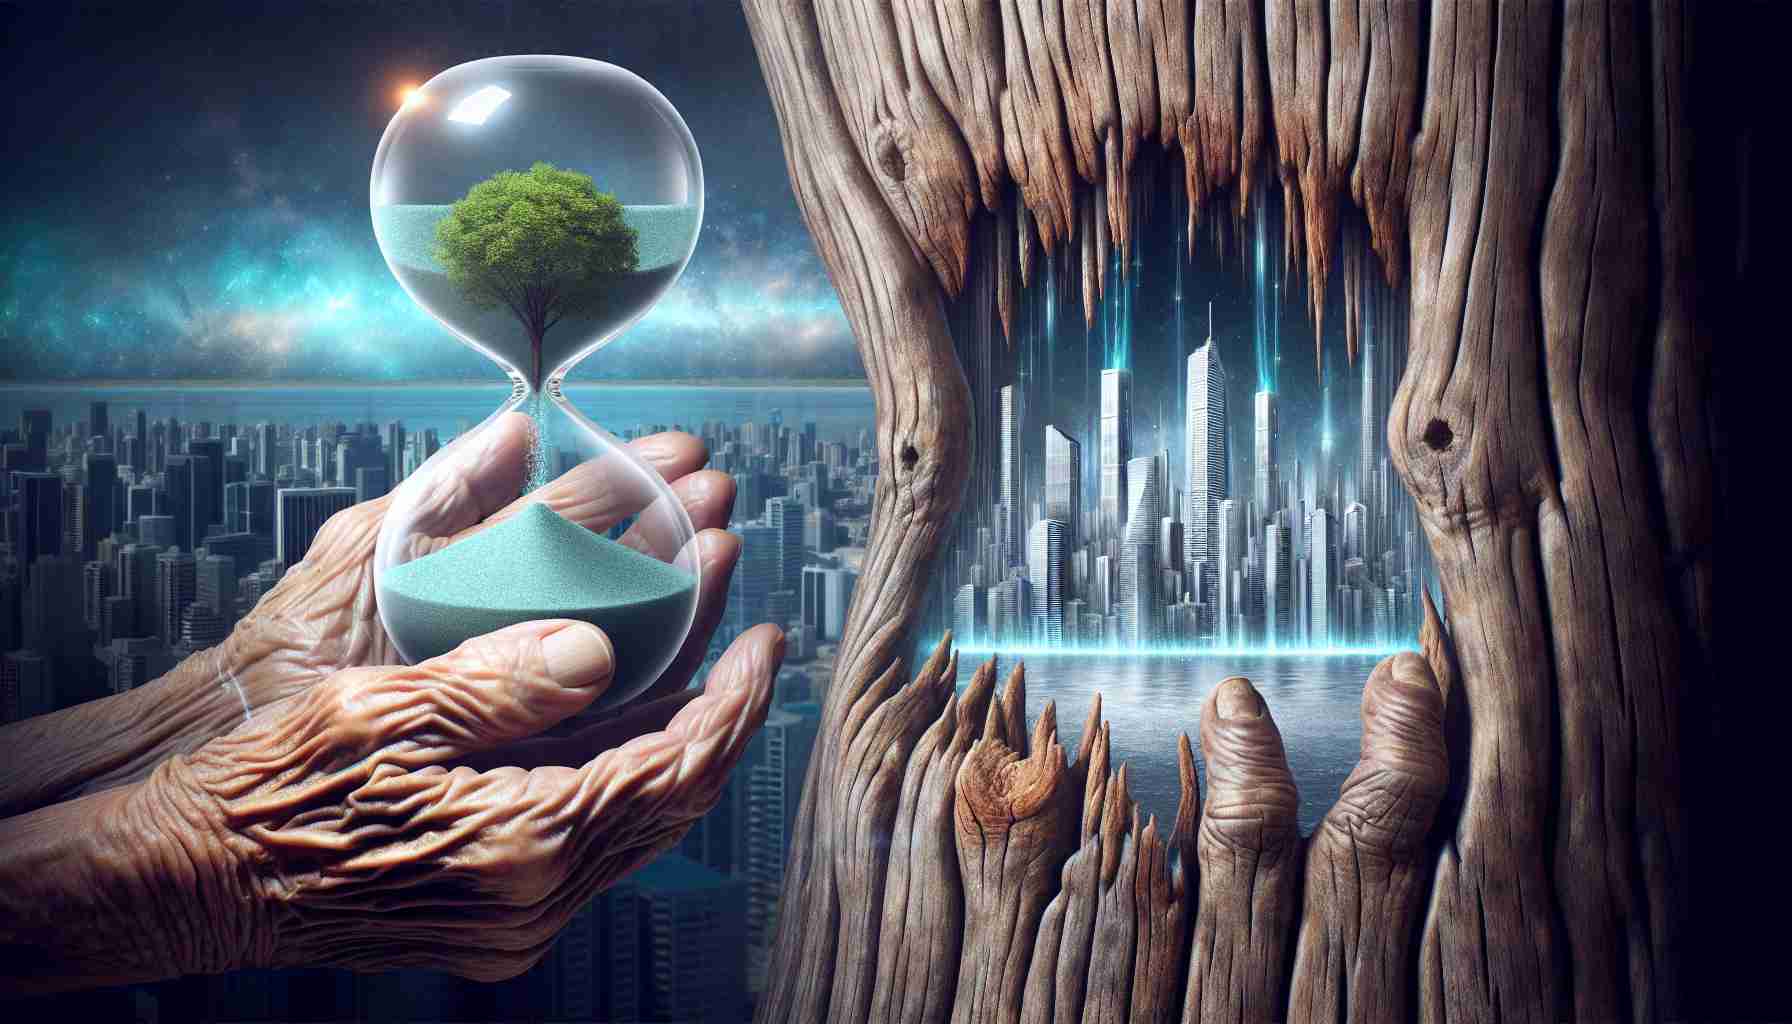 Create a detailed and realistic high-definition image that encapsulates the concept of 'Redefining Longevity: A Vision Beyond Centuries'. It should portray wrinkle-free tree bark showcasing its age and resilience, a never-ending hourglass whose sand represents countless generations, and in the background, a high-tech city representing the future, to represent advances in science and technology.